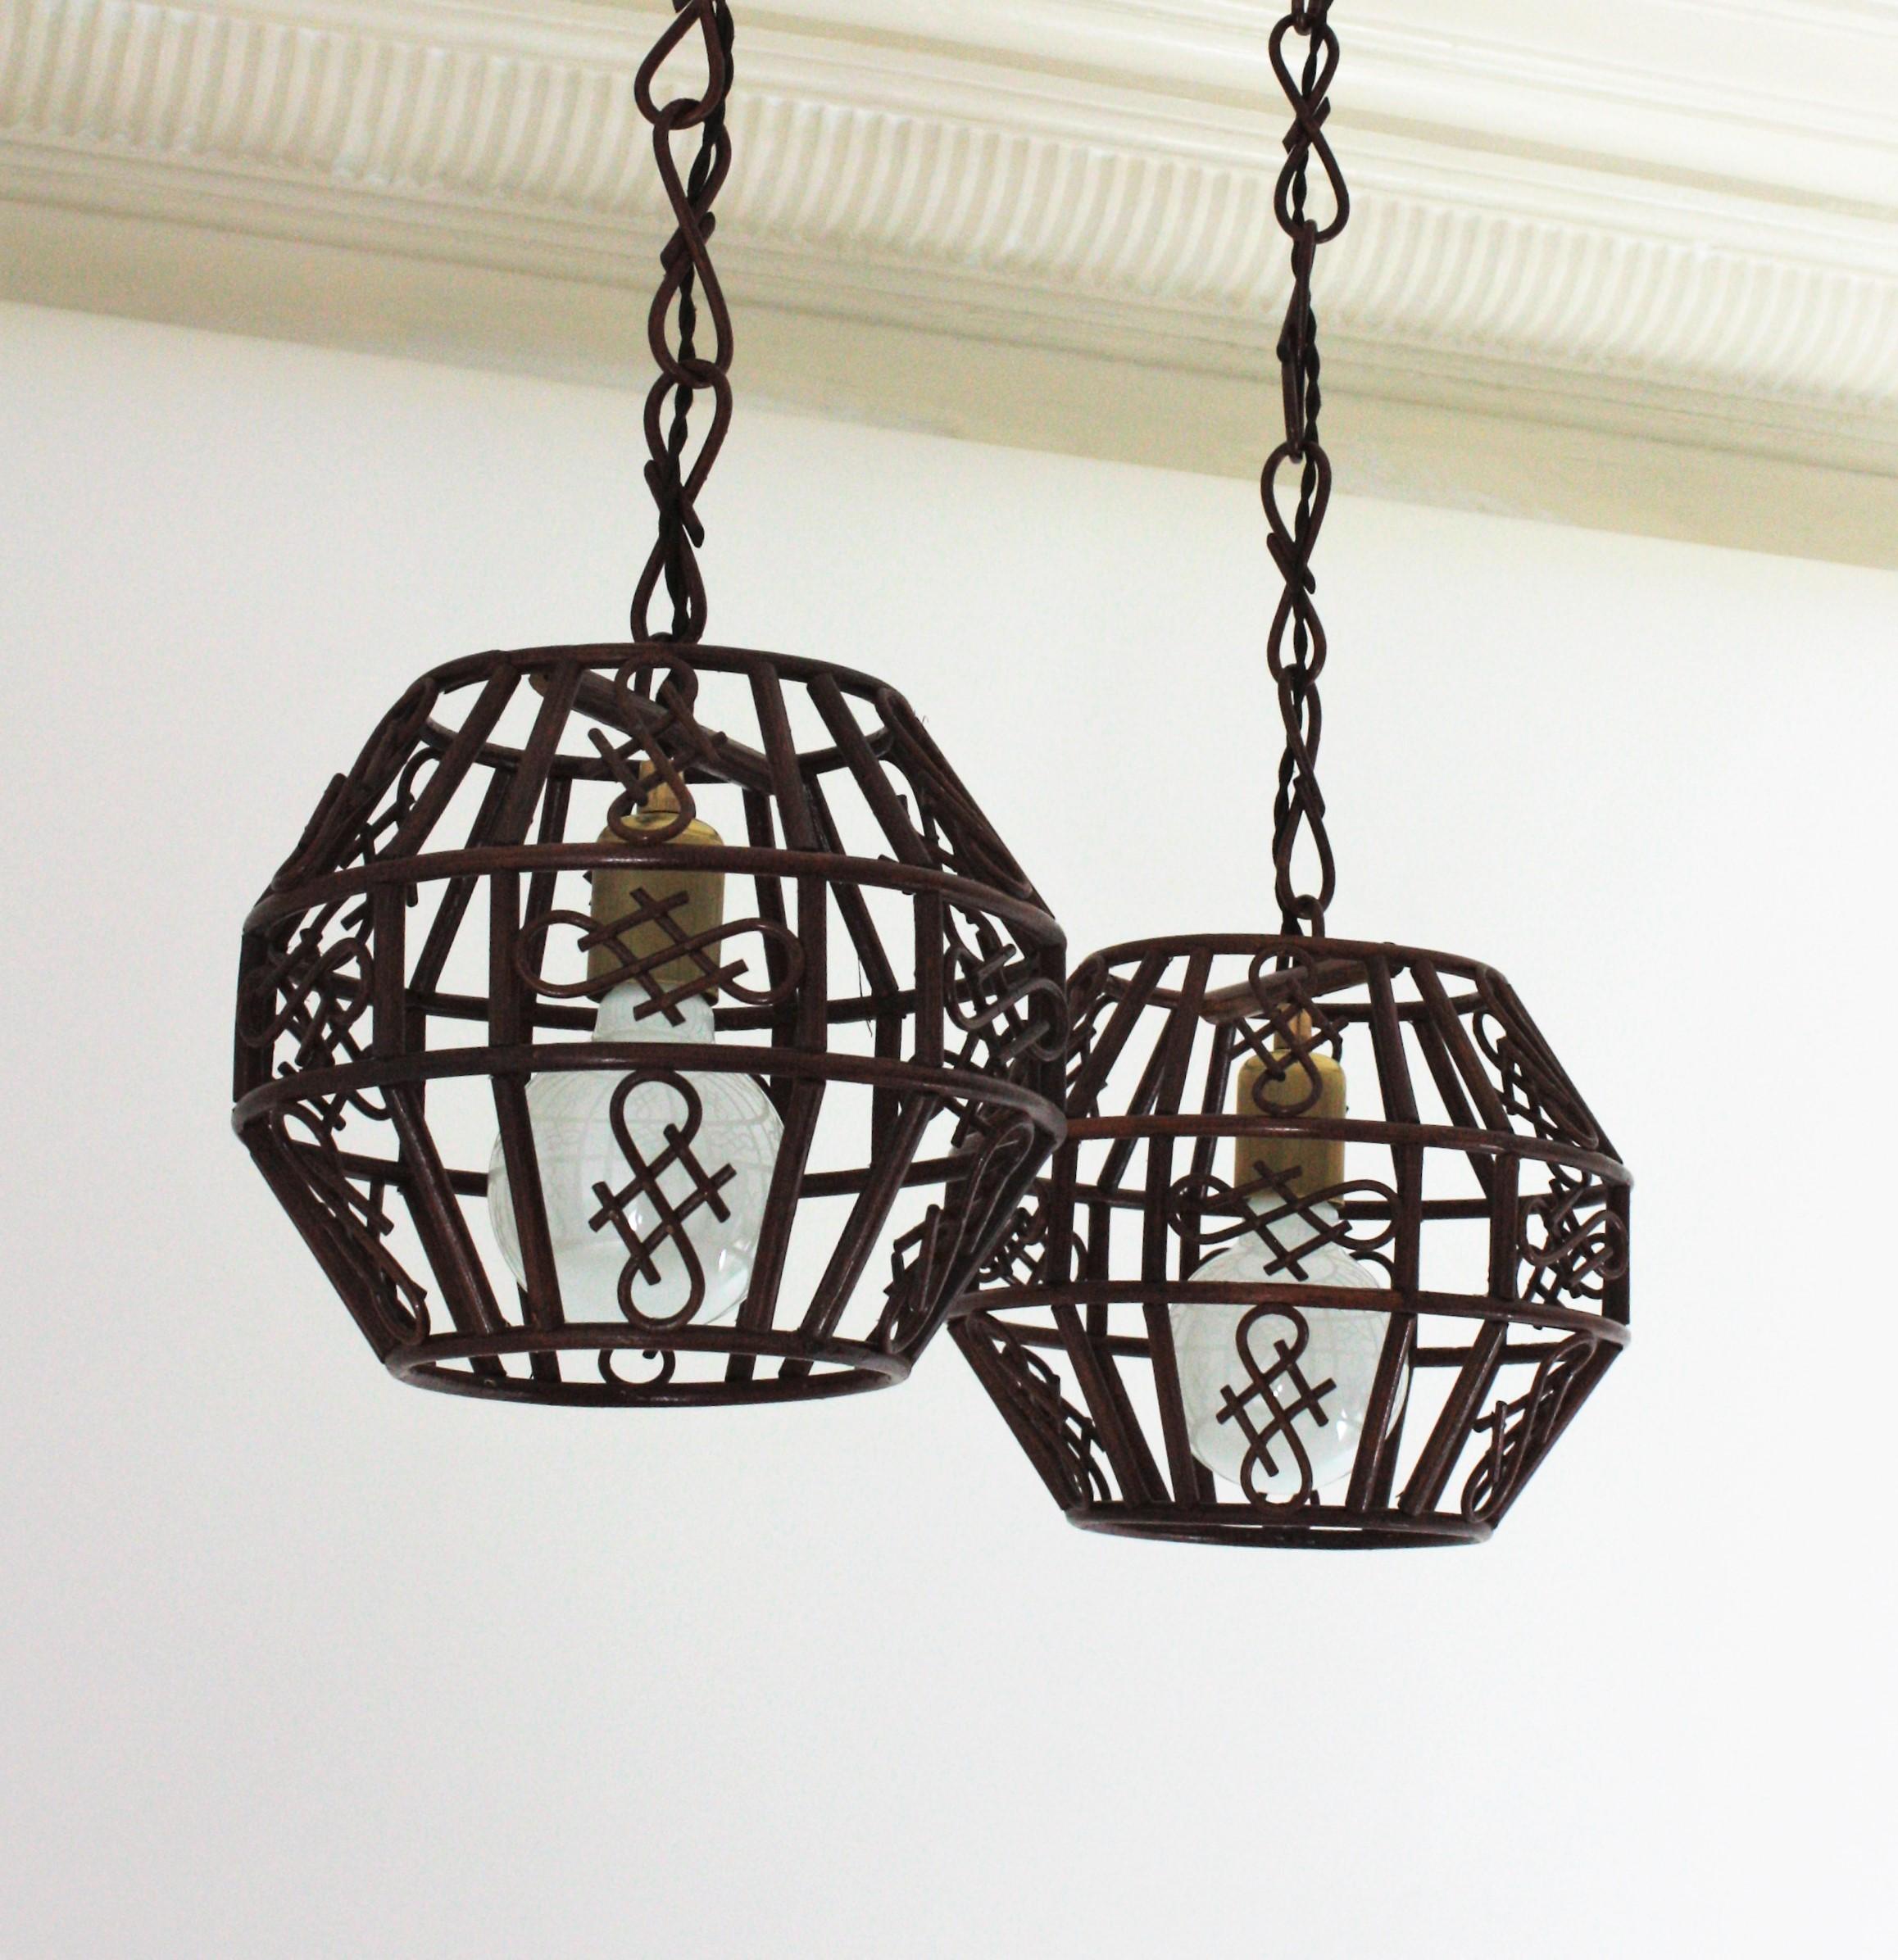 Pair of French Rattan Pendant Lights or Lanterns, 1960s For Sale 2